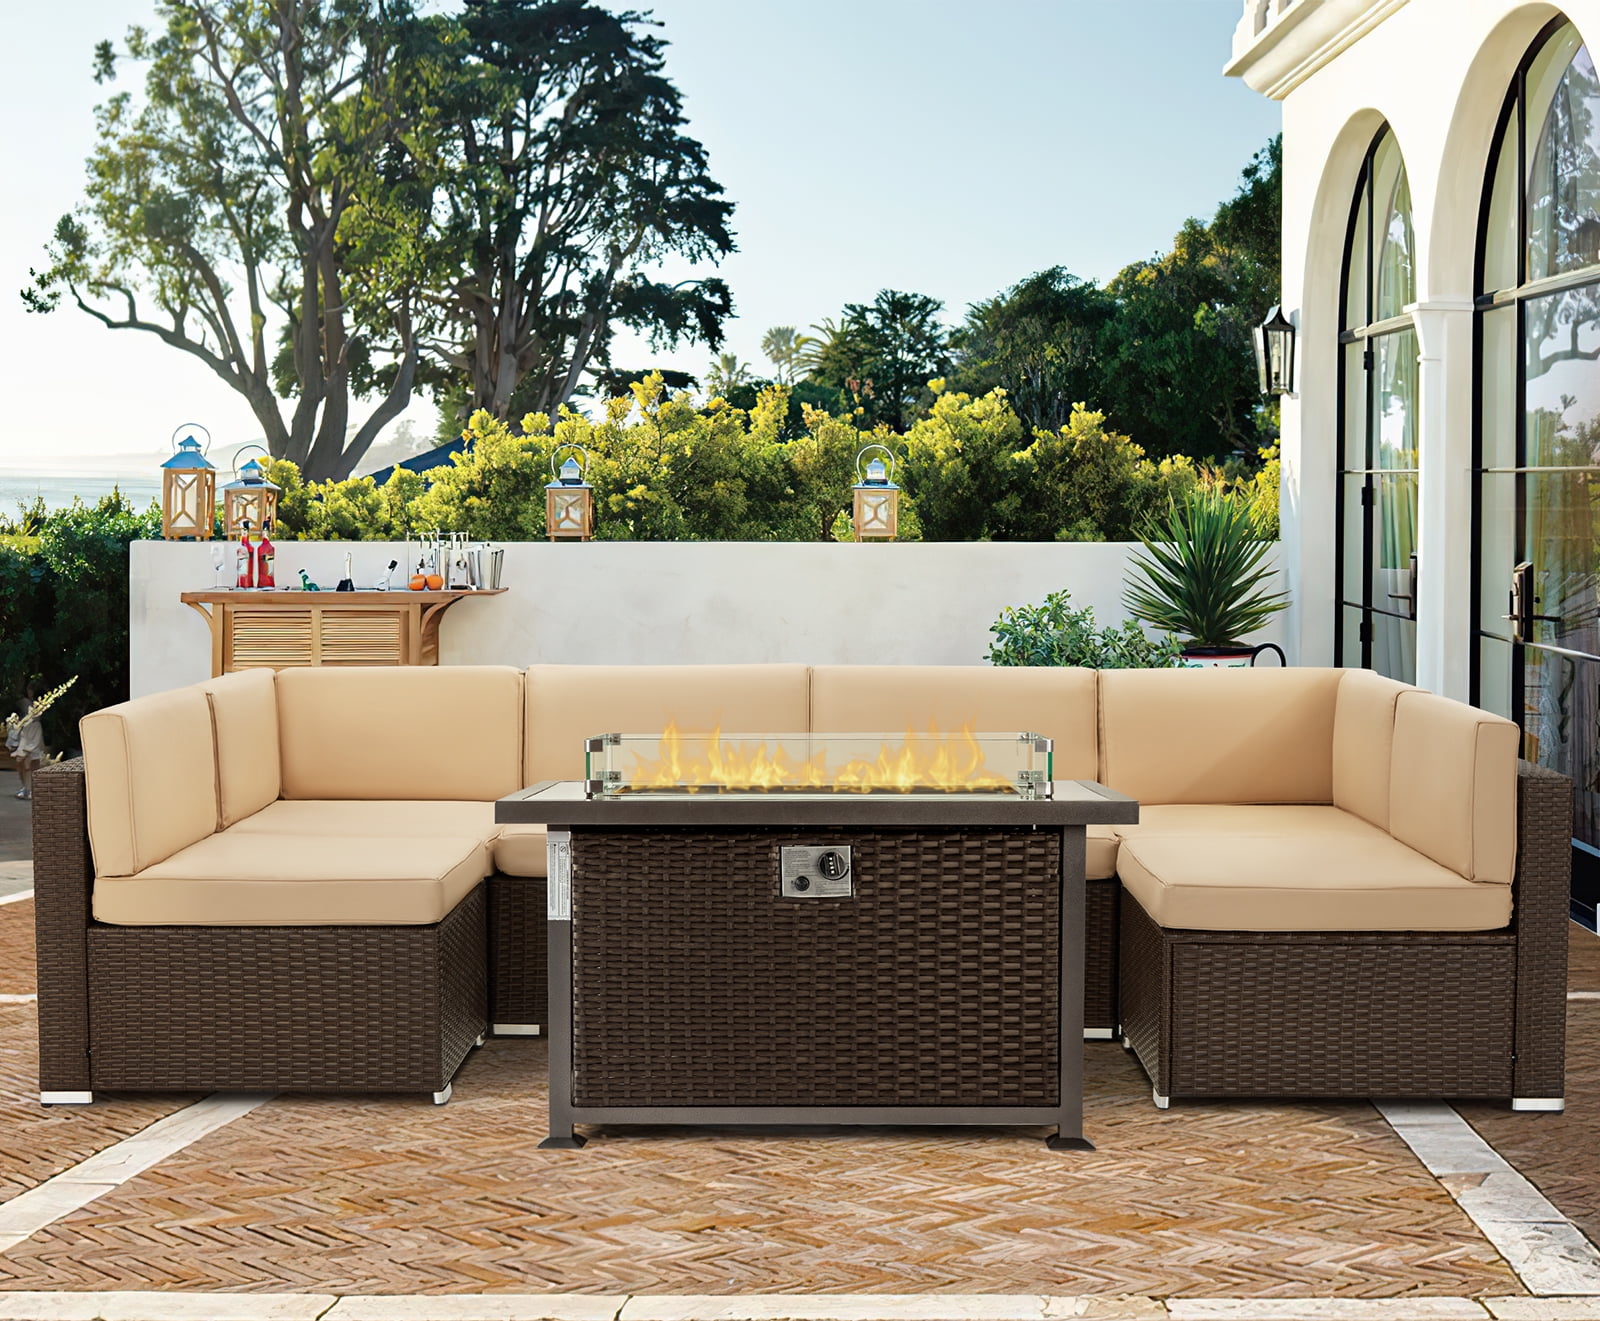 Danrelax 7 Pieces Patio Furniture Sectional Sofa with Gas Fire Pit Table -  Walmart.com